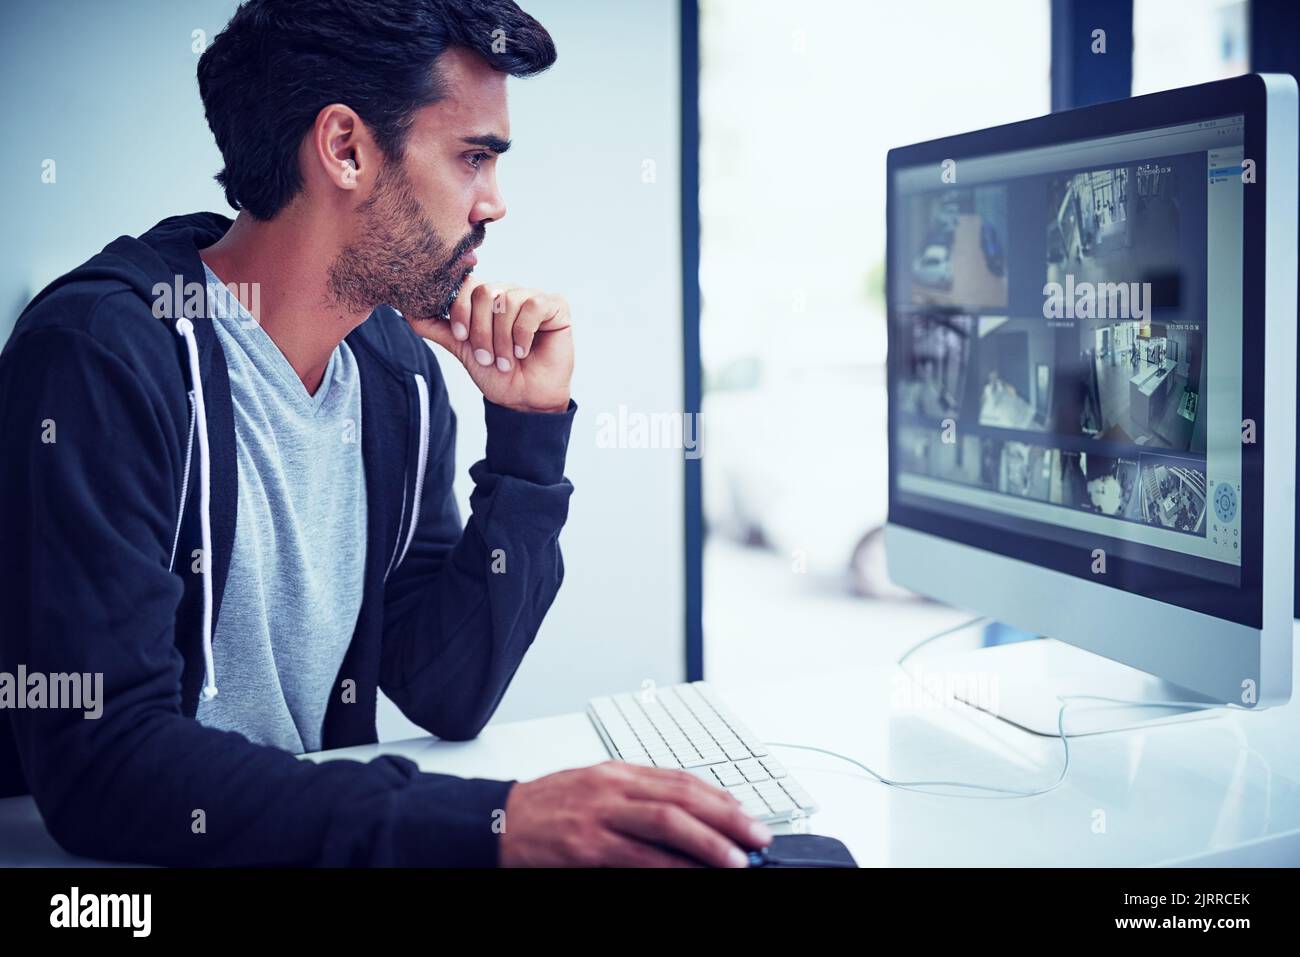 Keeping a close eye on things. a young man watching security footage on his computer. Stock Photo